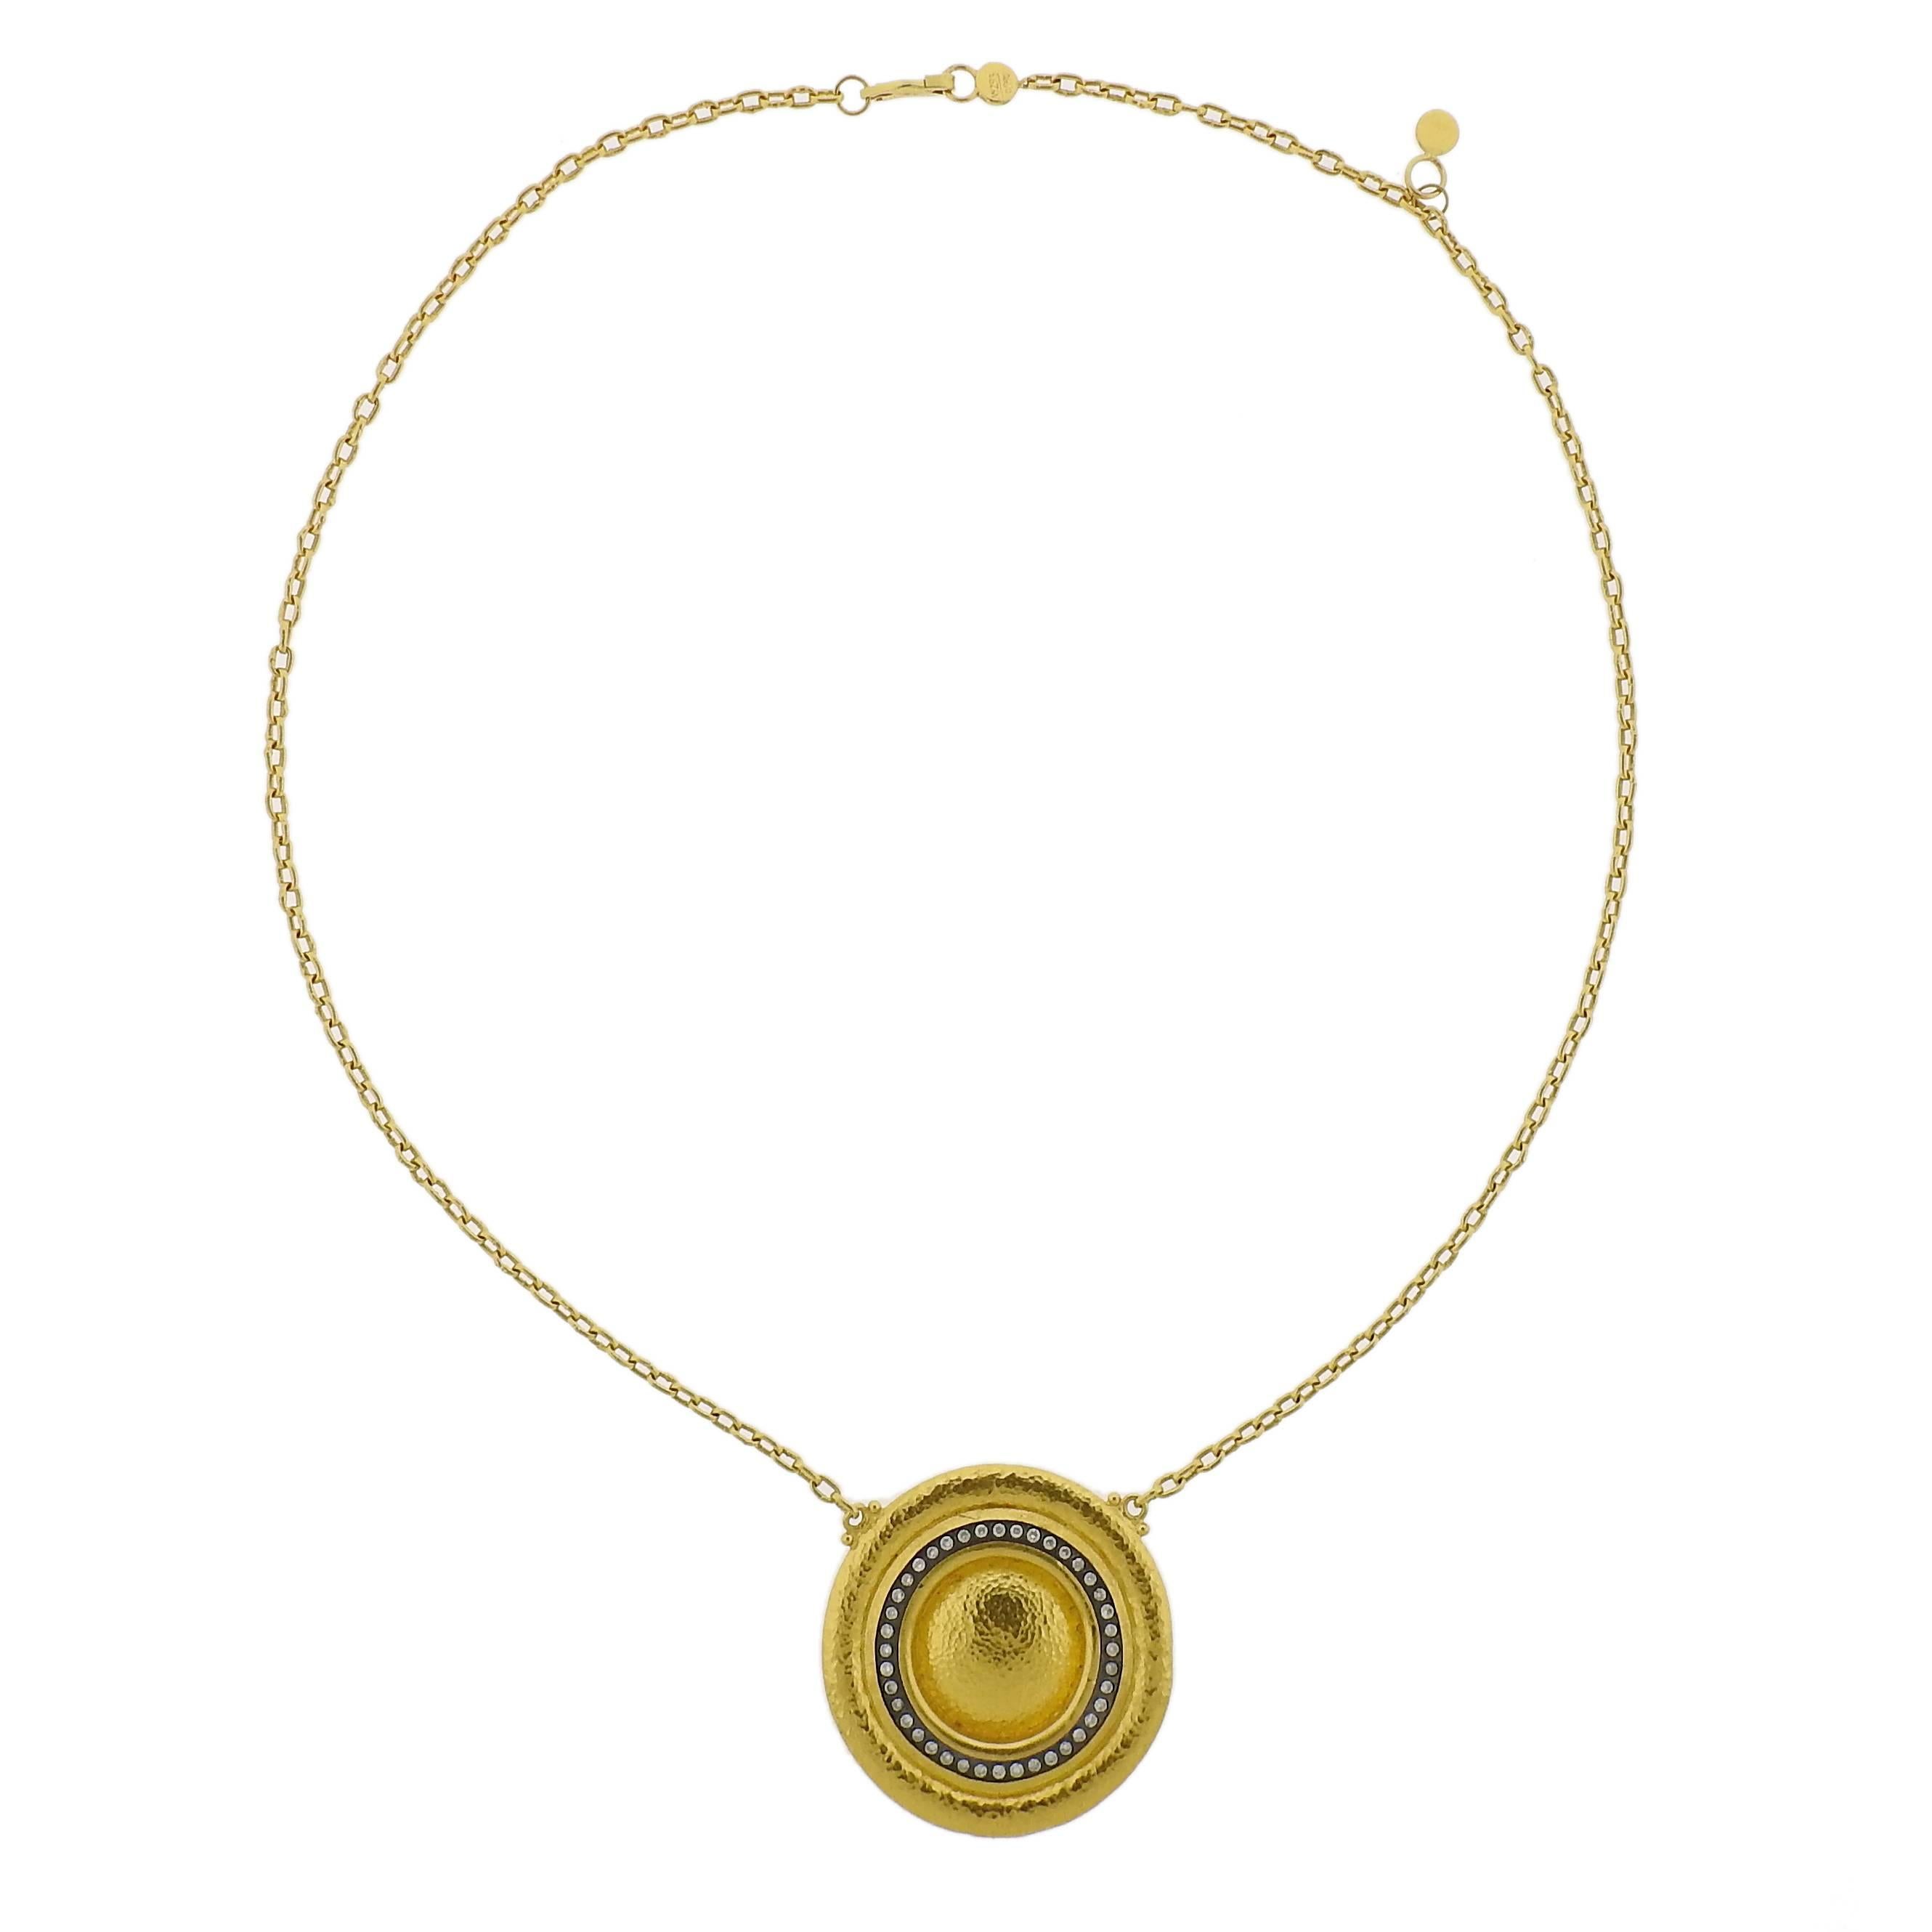 24k yellow gold necklace, featuring 36mm circle pendant, decorated with approximately 0.55ctw in diamonds. Crafted by Gurhan, necklace is 18 1/4" long and weighs 23.7 grams. Marked with Gurhan hallmark, NY293, 0.990. 